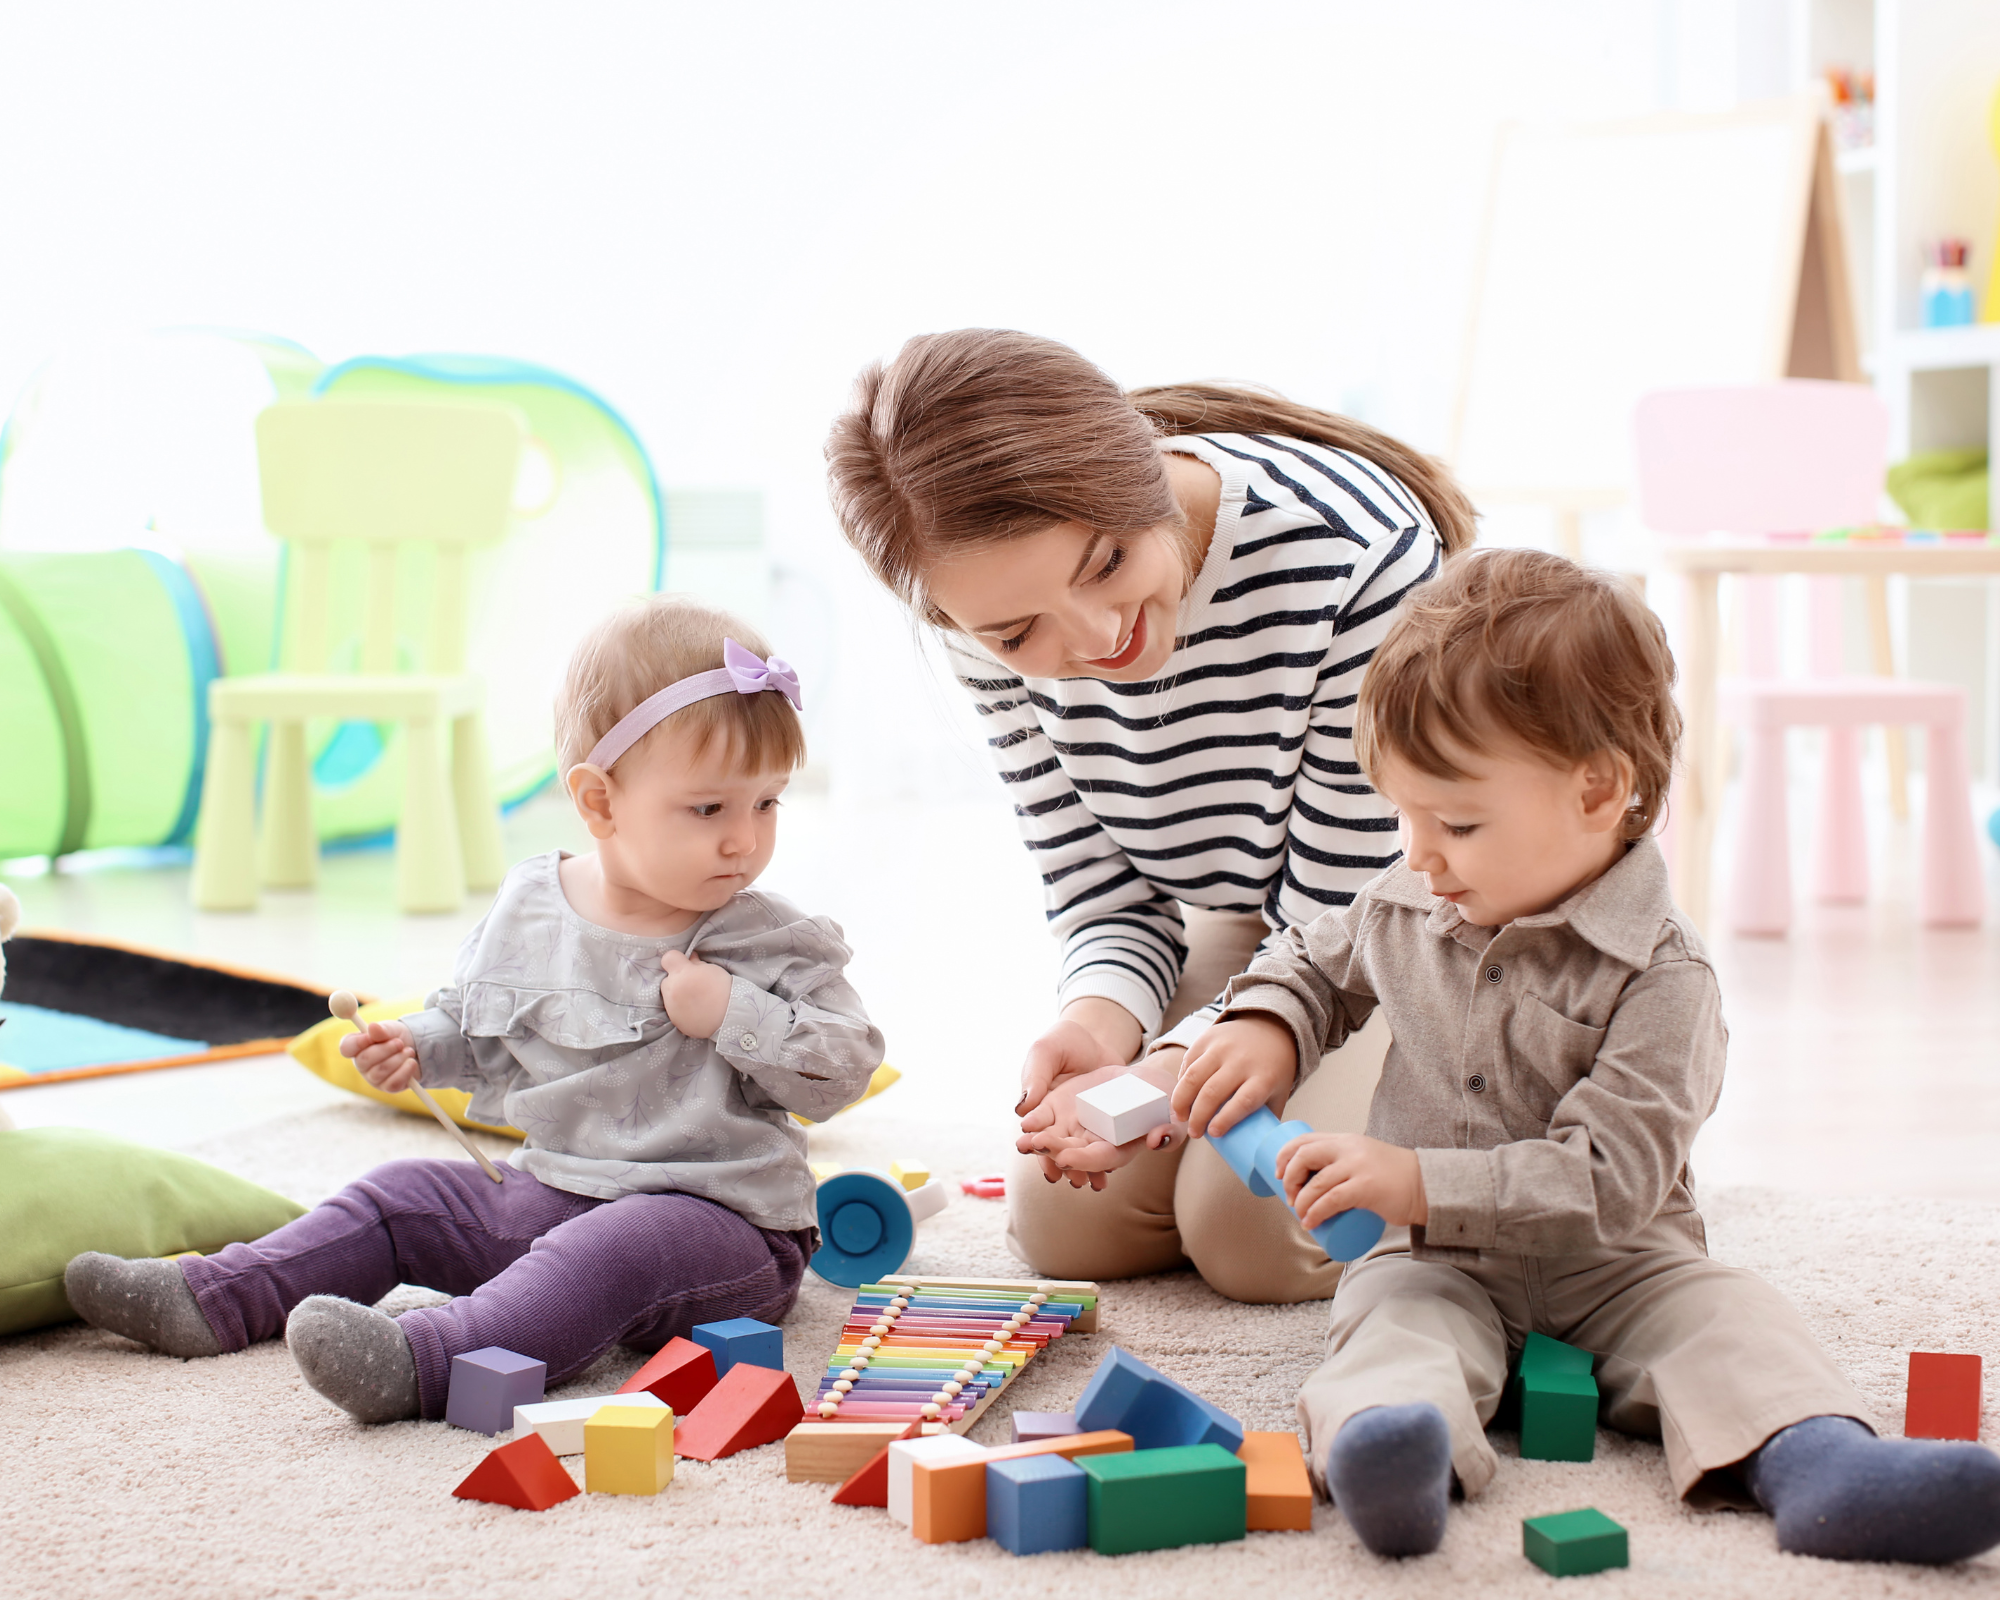 babysitter playing on the floor with two children: reasons to hire a babysitter